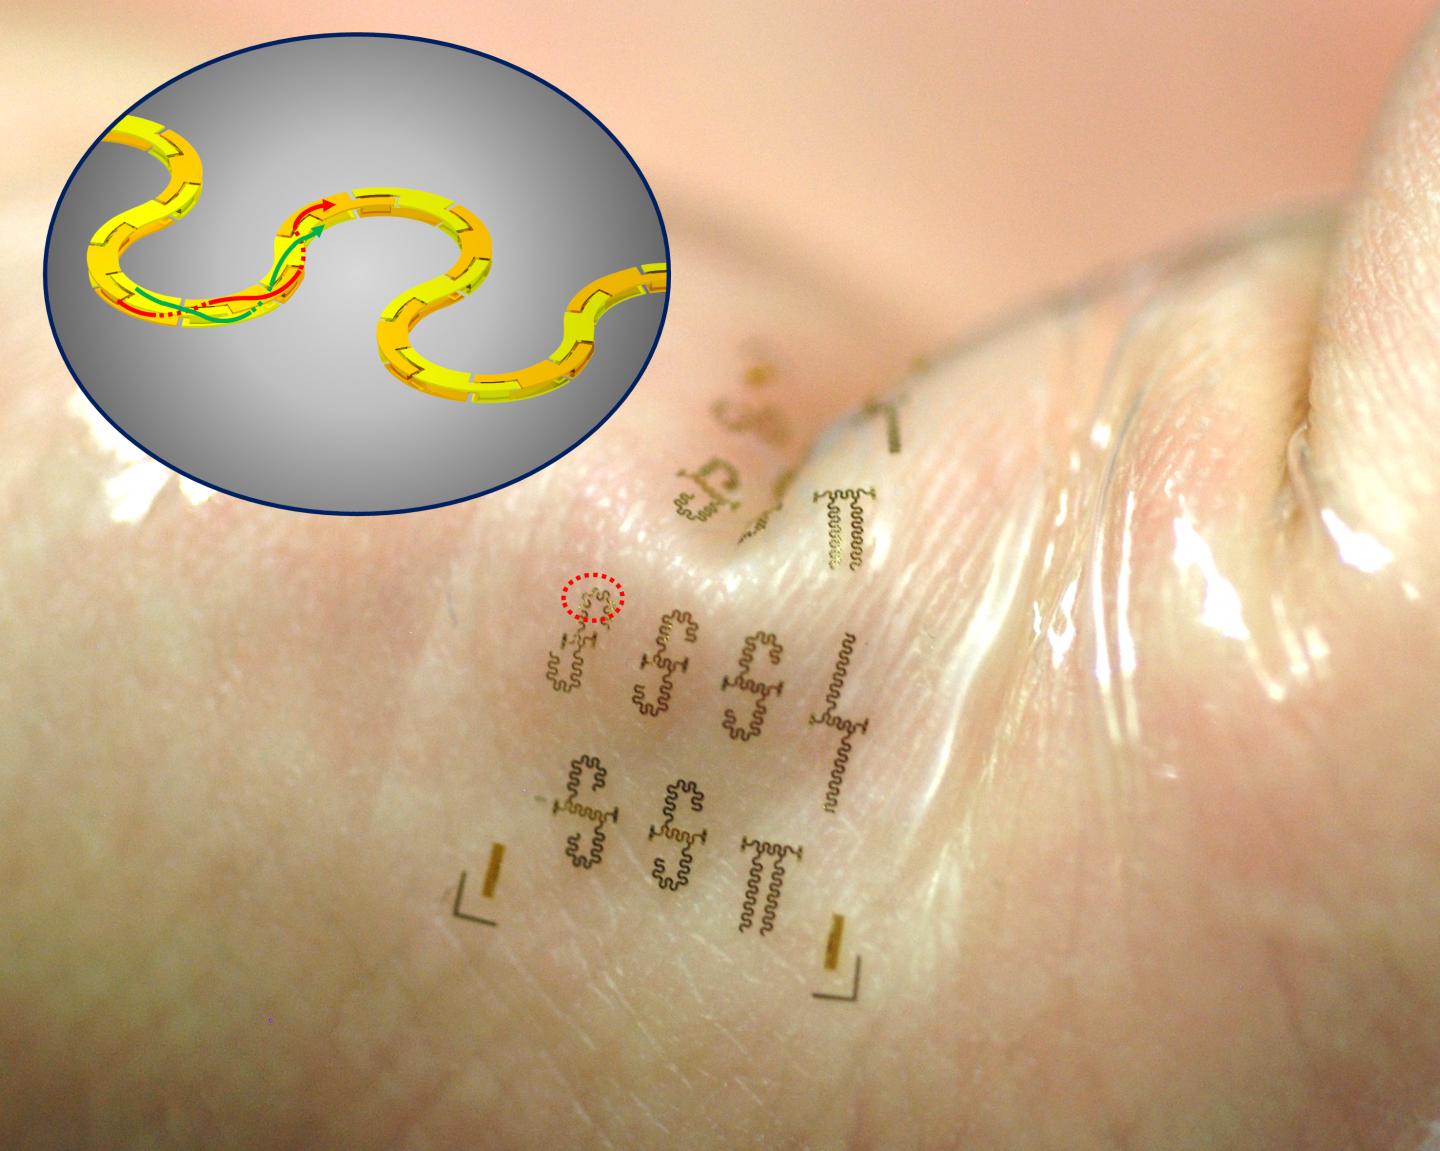 Fabricated in interlocking segments like a 3-D puzzle, the new integrated circuits could be used in wearable electronics that adhere to the skin like temporary tattoos. Because the circuits increase wireless speed, these systems could allow health care staff to monitor patients remotely, without the use of cables and cords, via Yei Hwan Jung and Juhwan Lee/University of Wisconsin-Madison